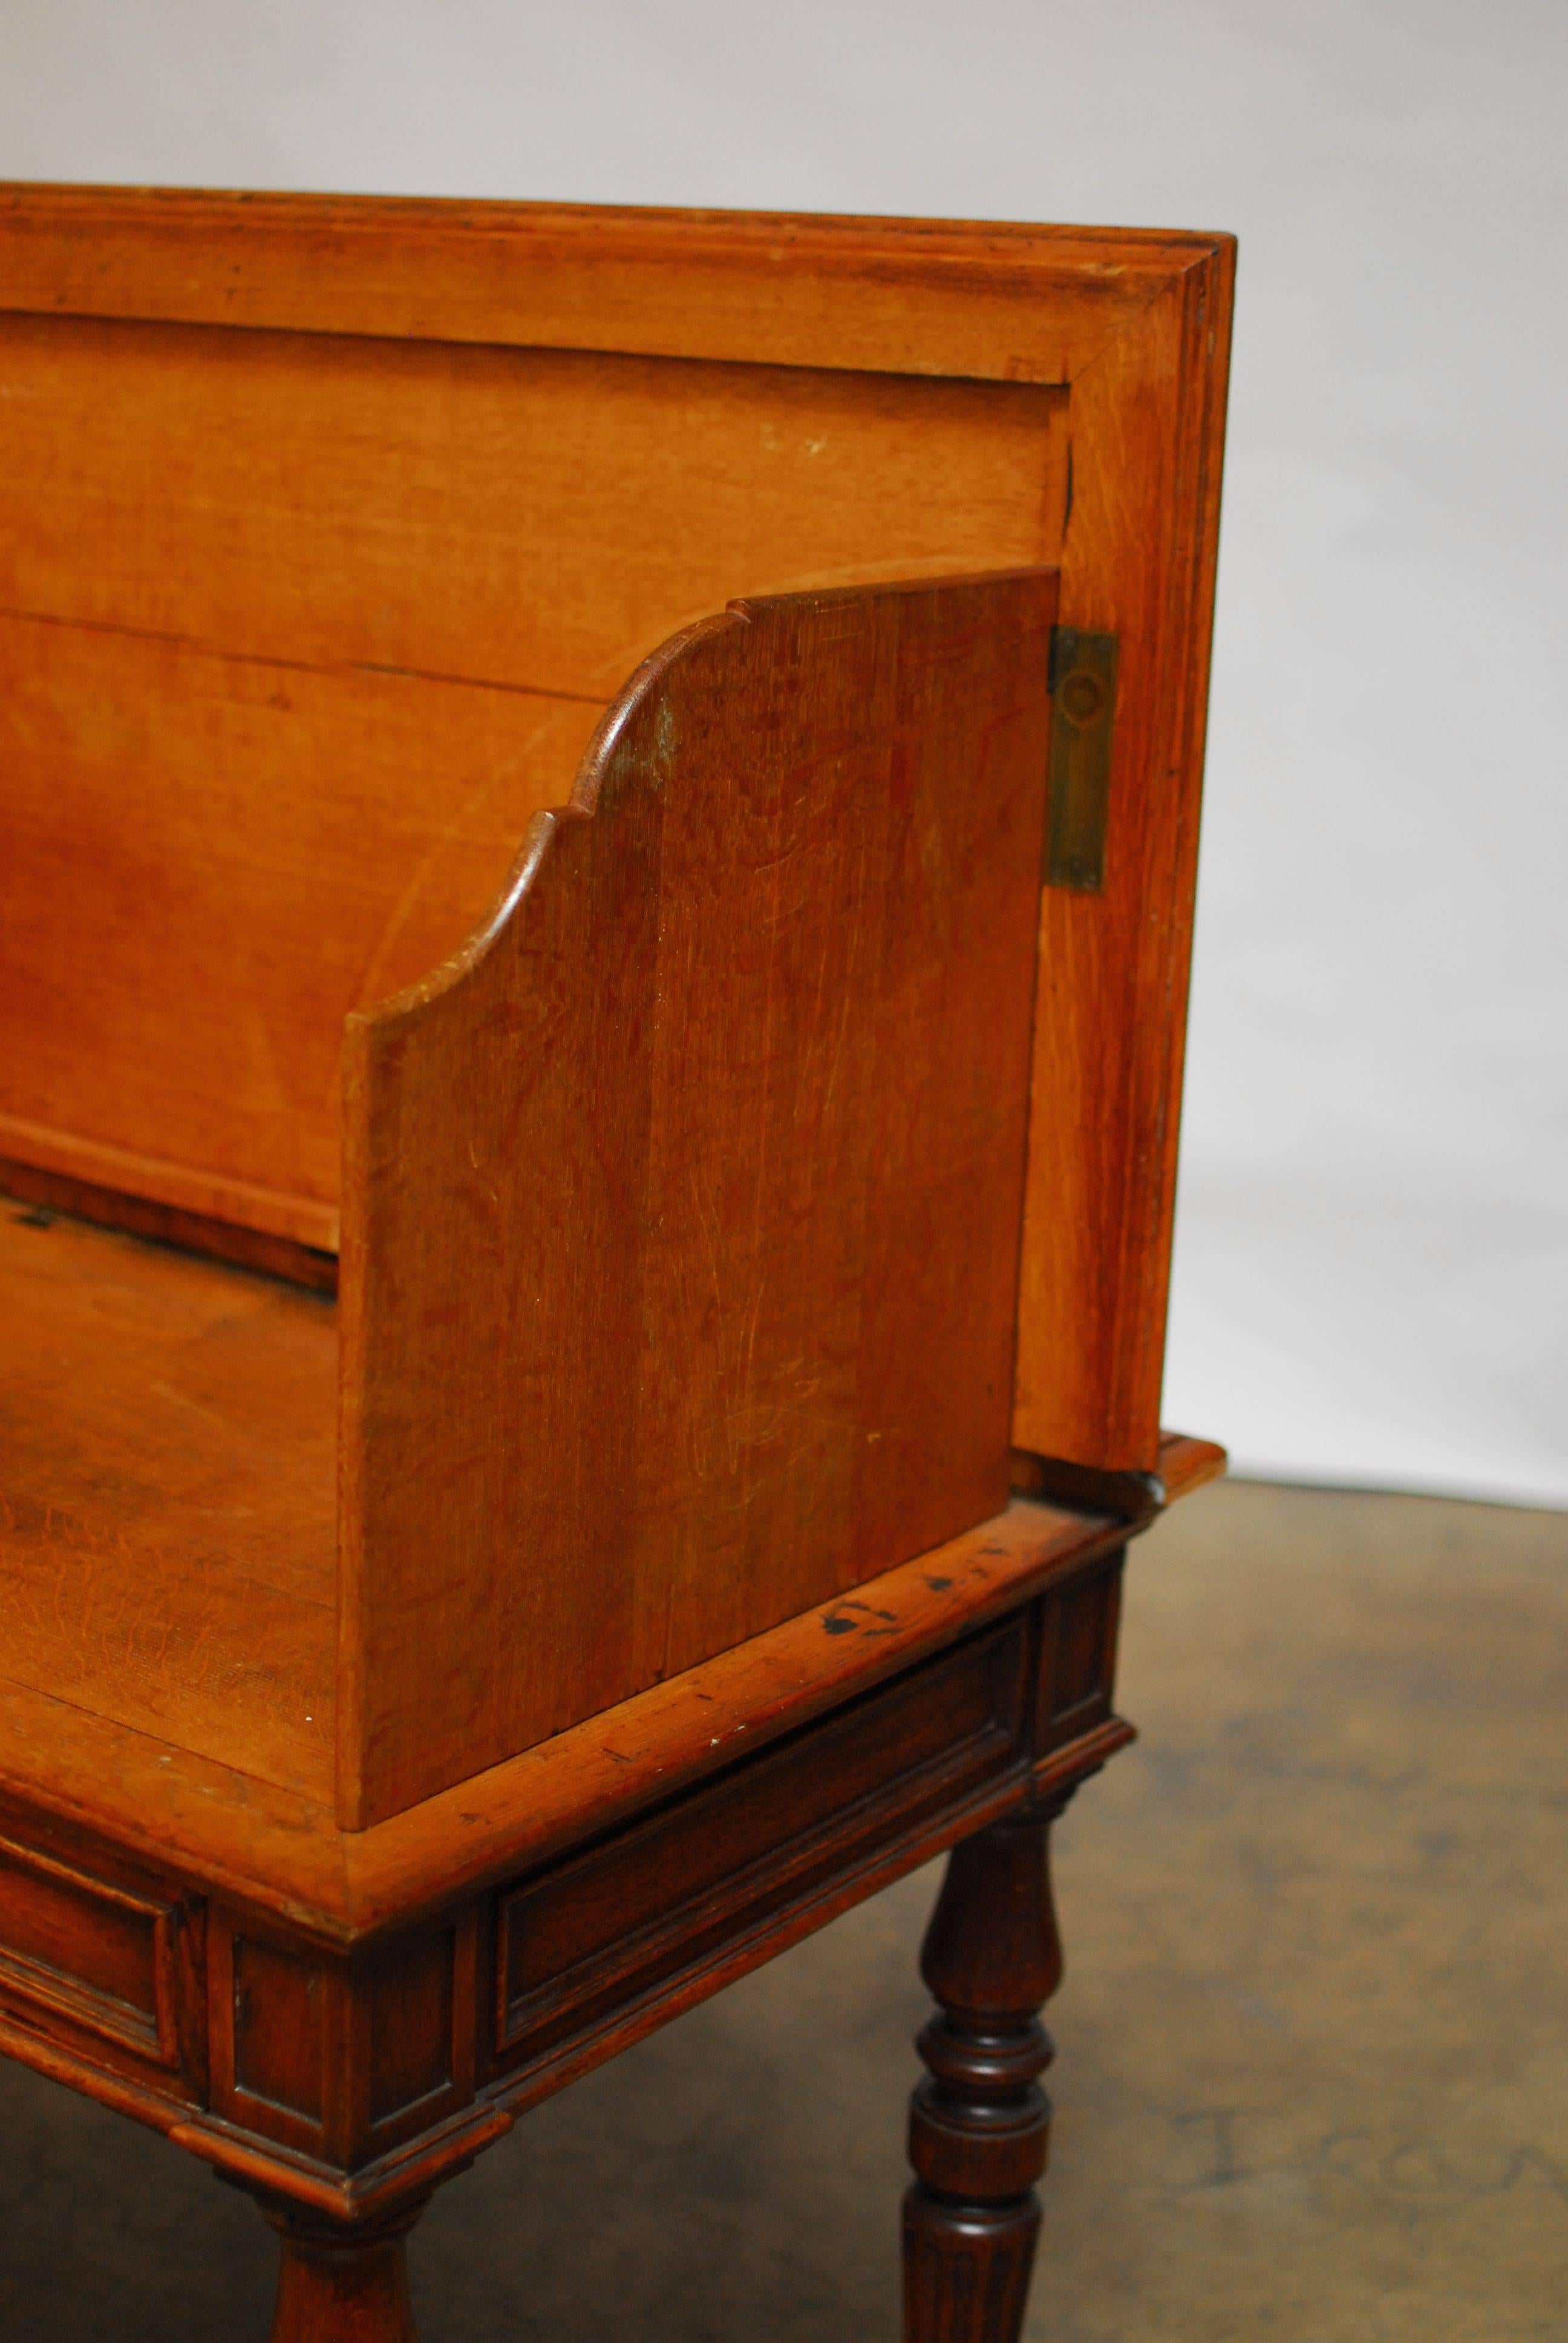 Hand-Crafted 19th Century English Desk with Folding Privacy Walls